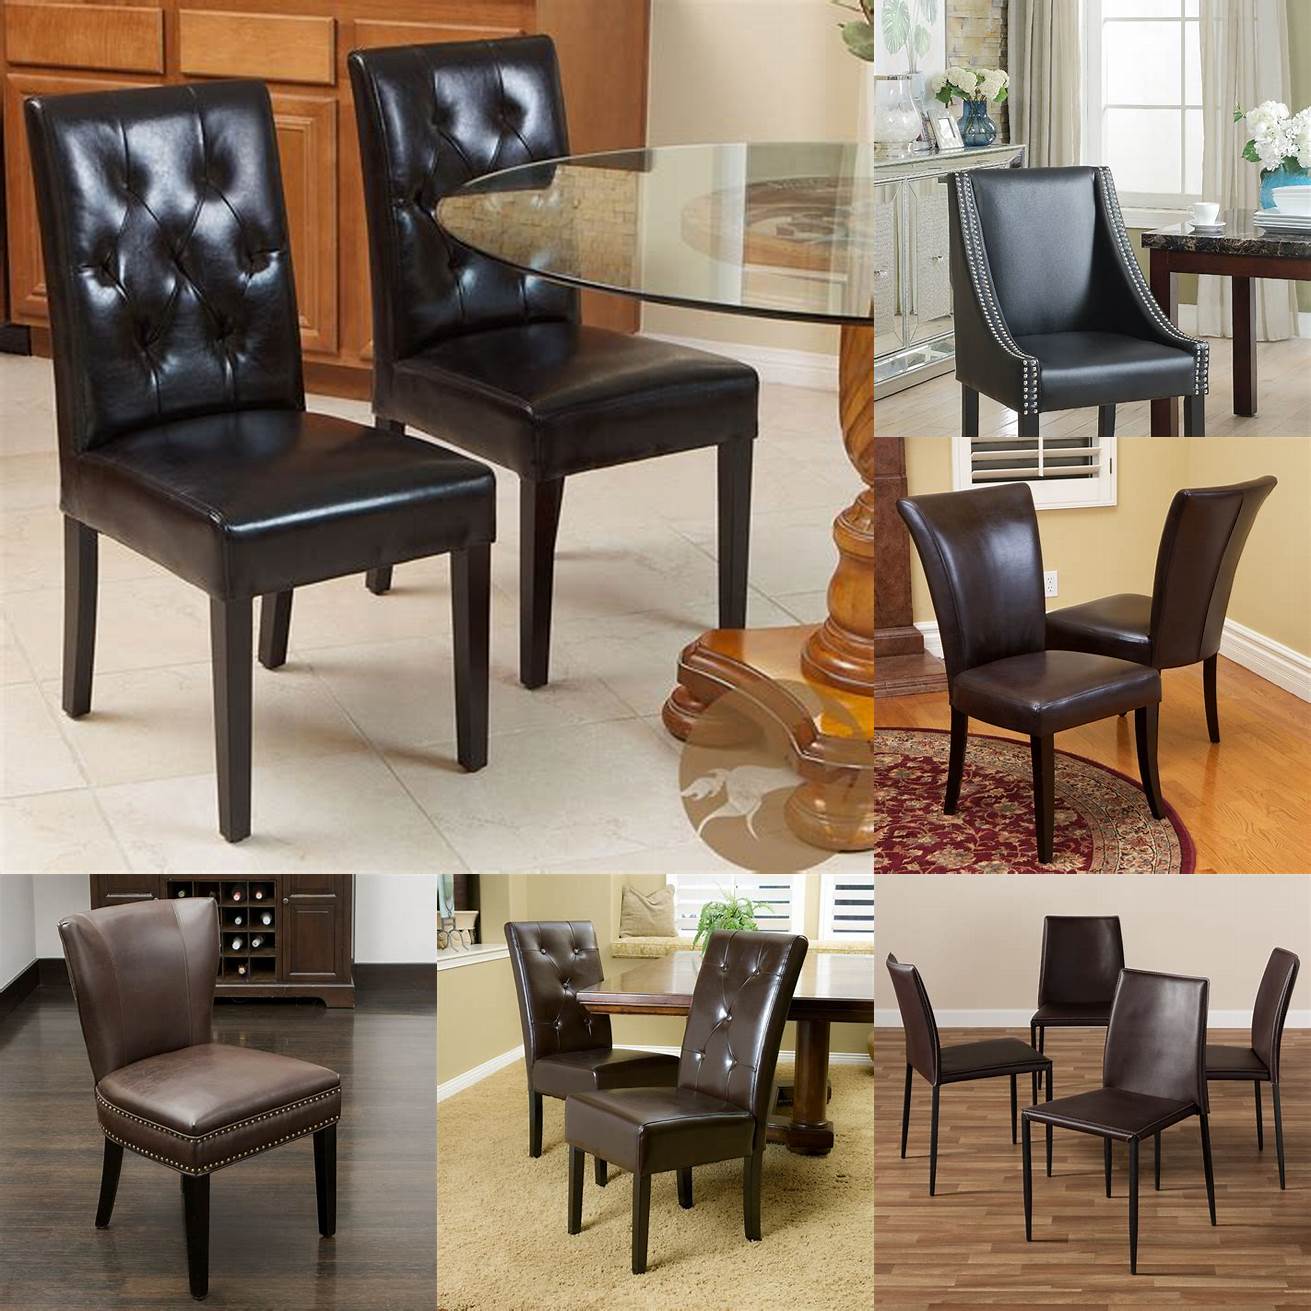 Leather dining chairs